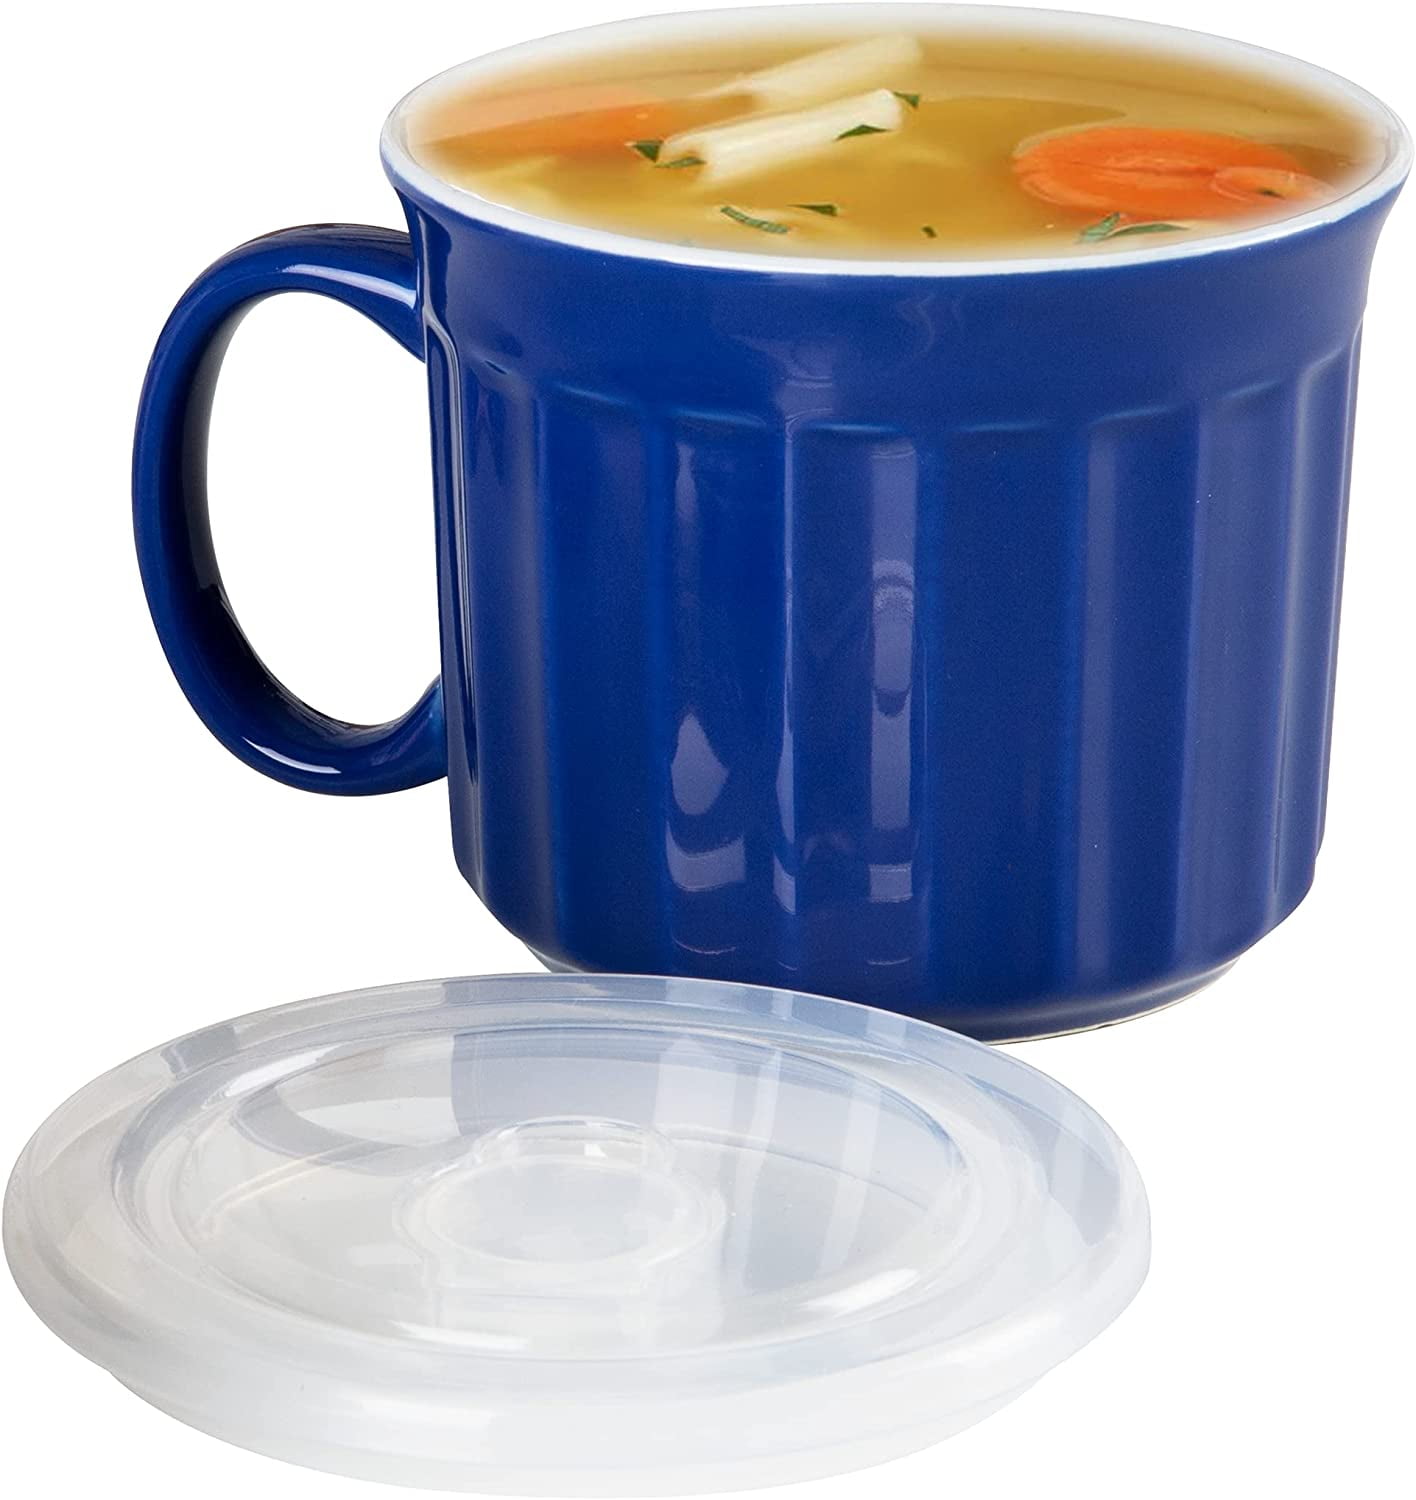 22 oz Microwave Soup Mug with Vented Lid by Chefs Pride 